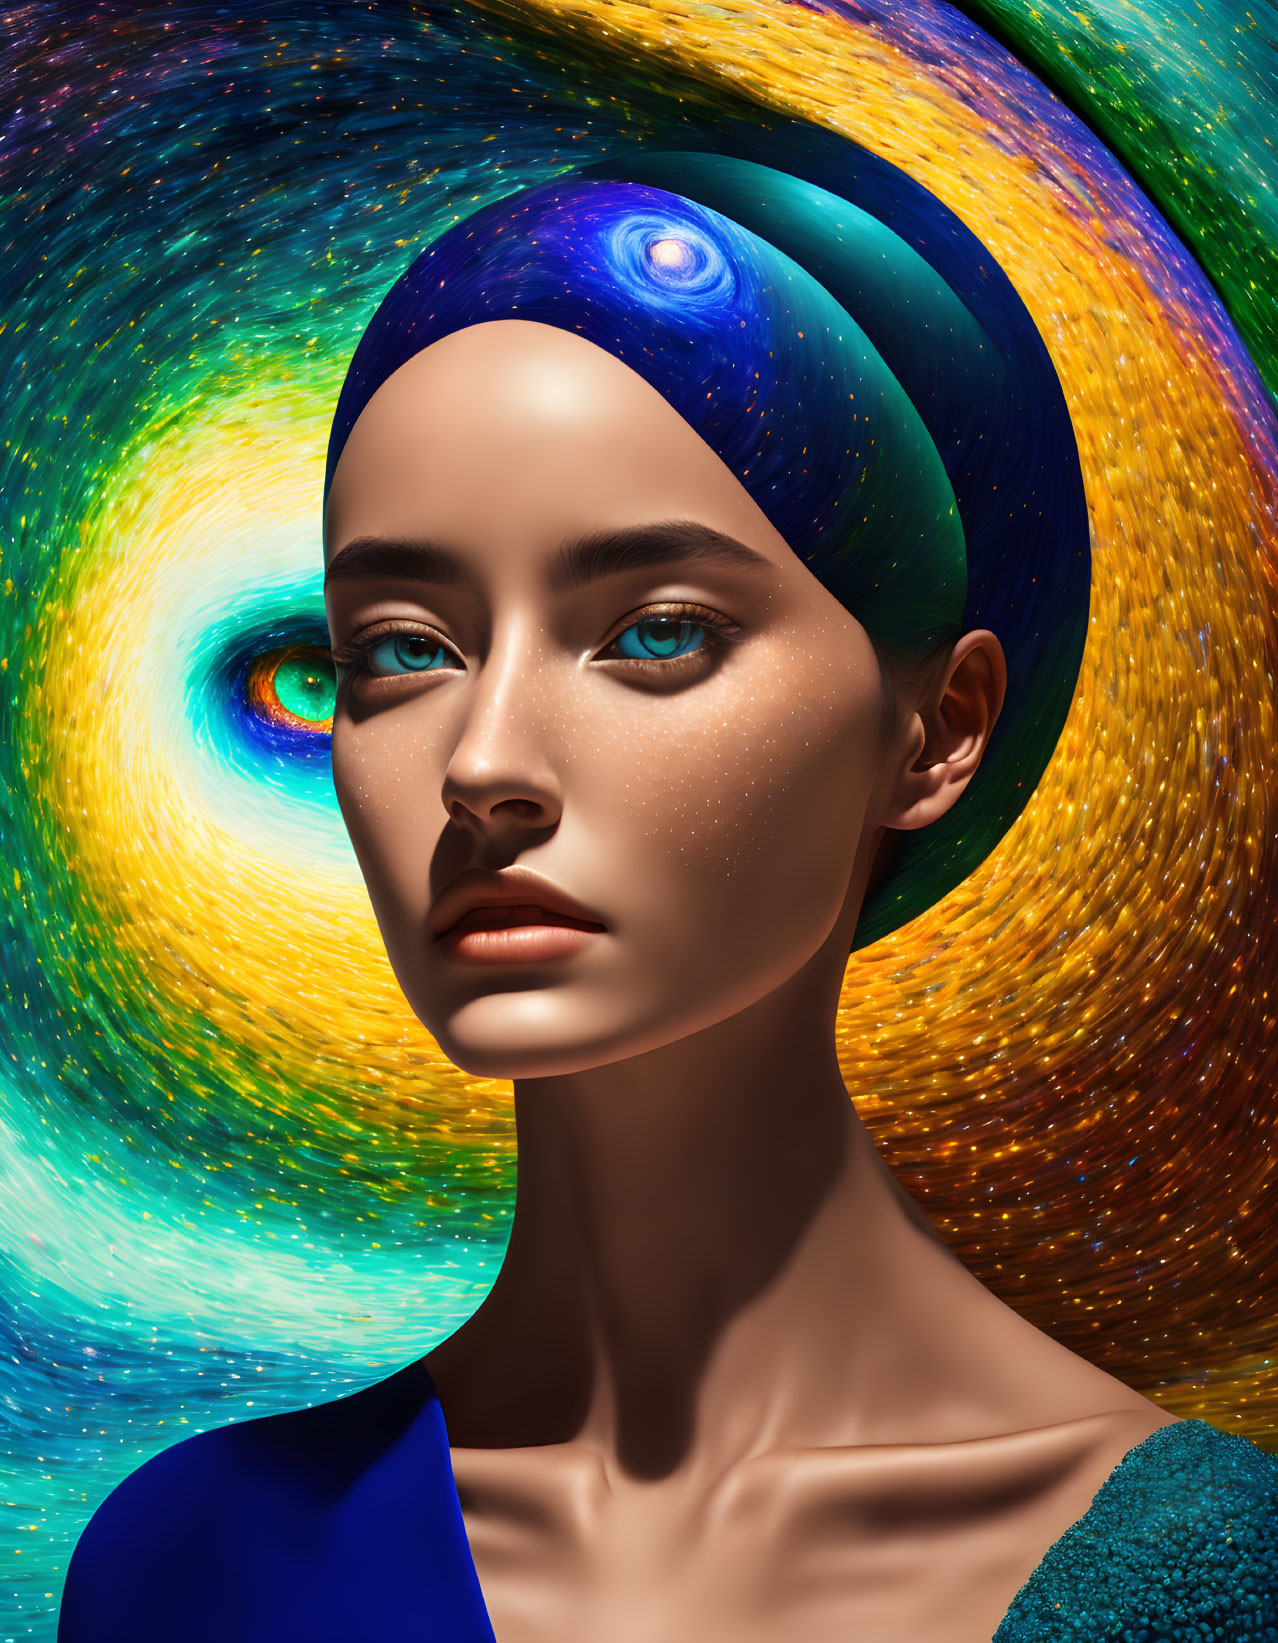 Digital artwork of woman with cosmic-themed makeup and attire, swirling galaxies and stars.